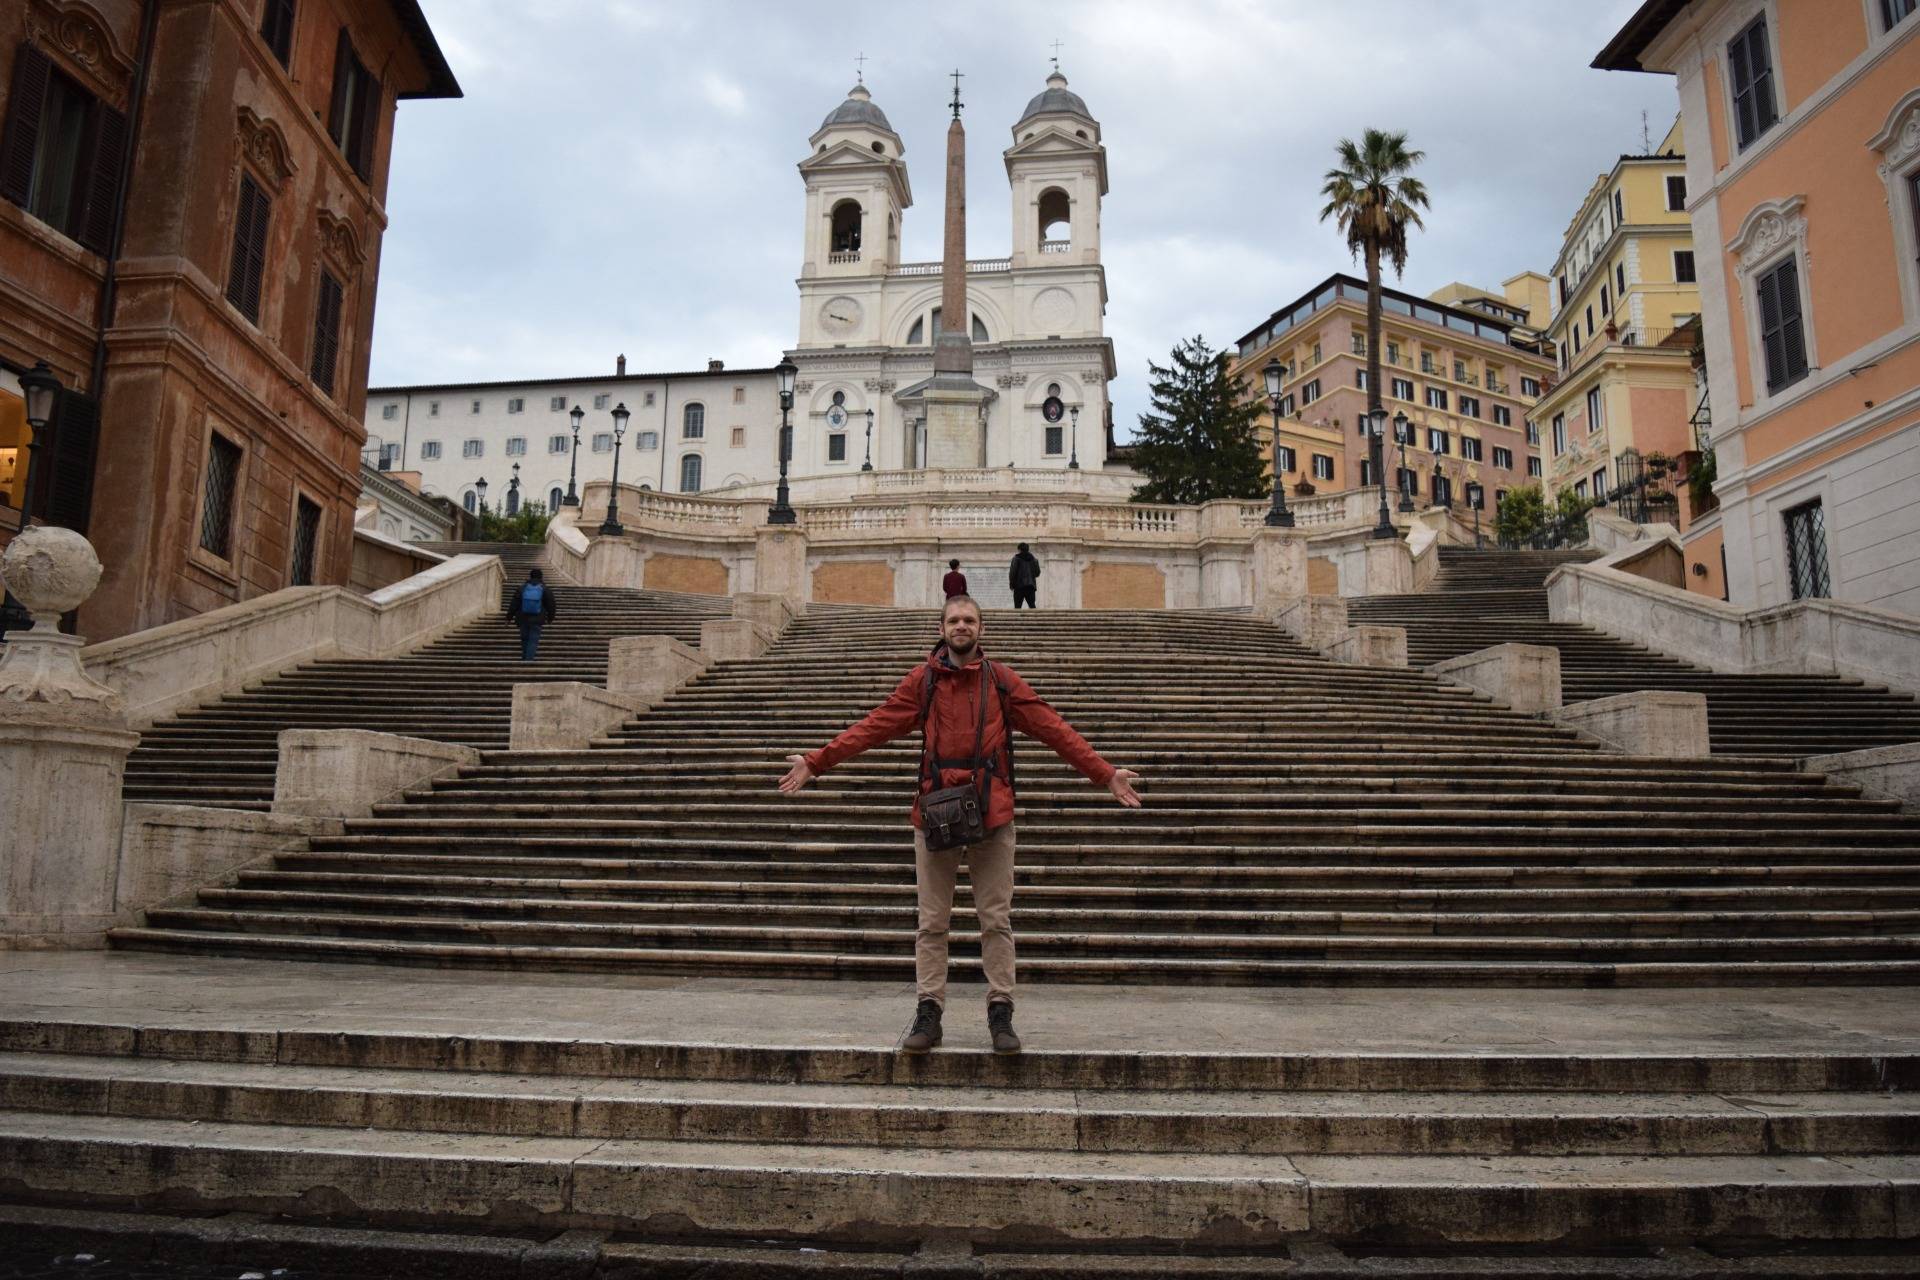 Customary arms out pose at the Spanish Steps!